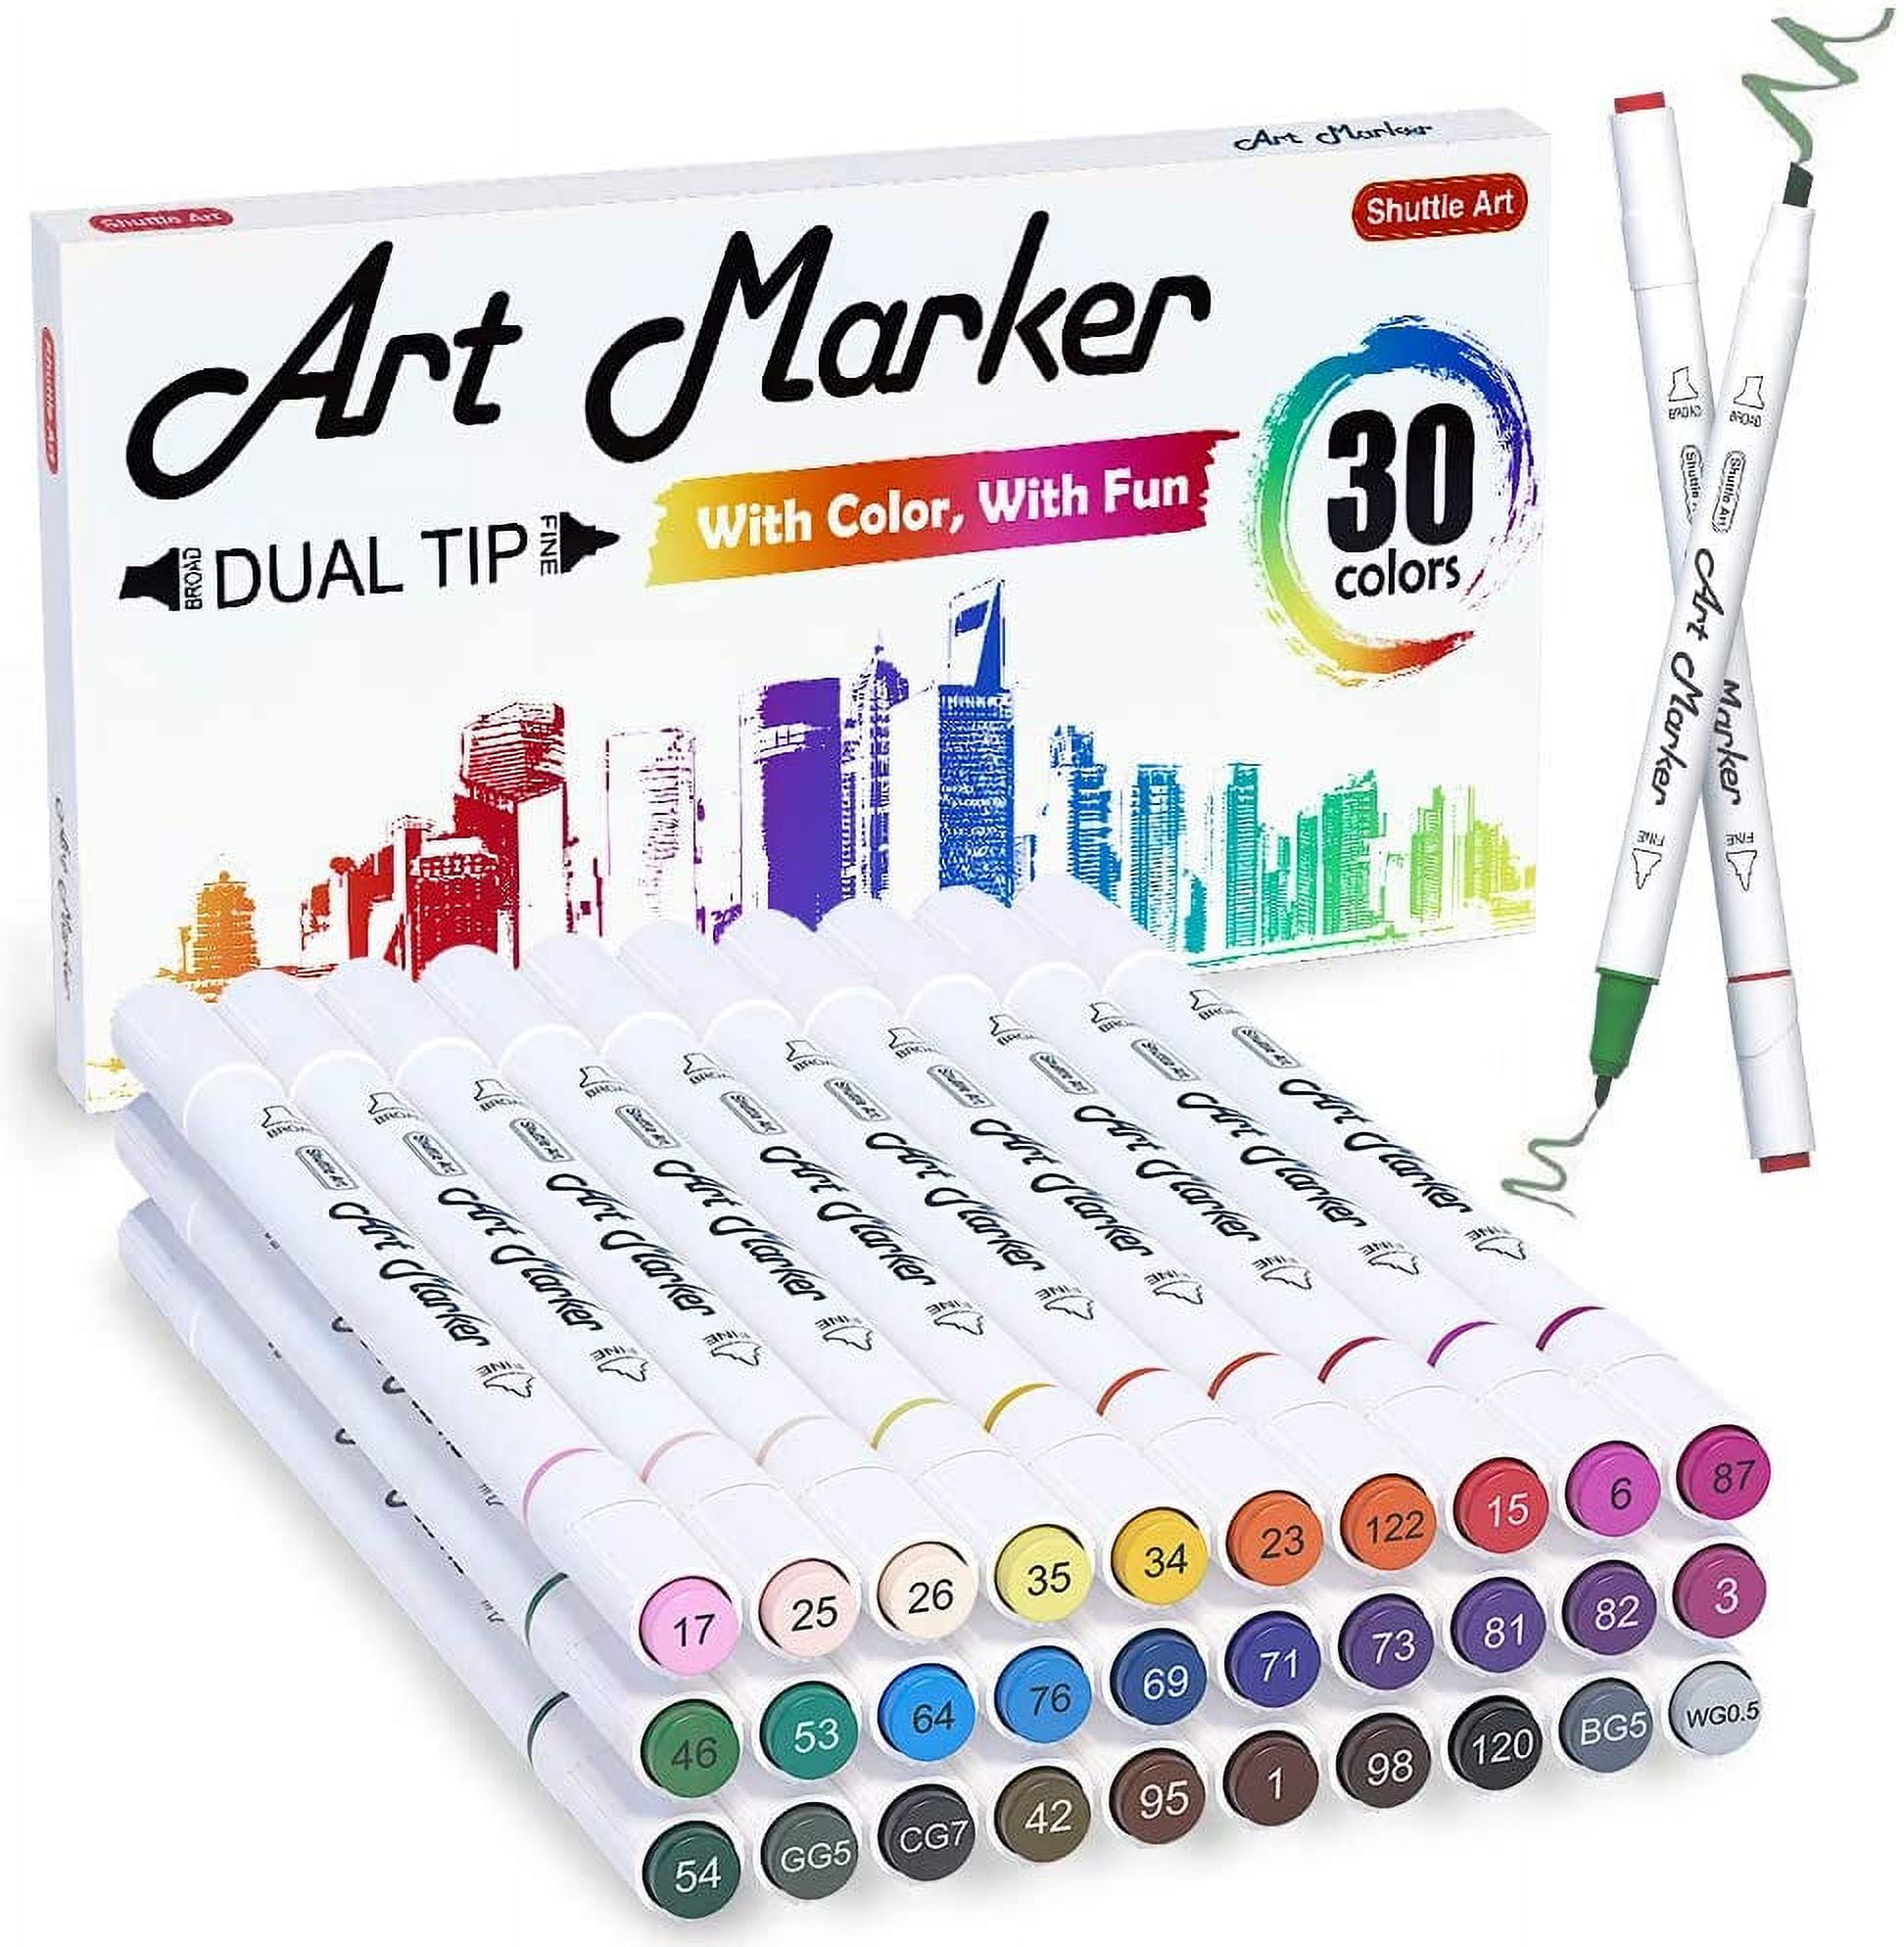 30 Colors Dual Tip Art Markers,Shuttle Art Marker Pens for Kids Adult  Coloring Books Sketching and Card Making 